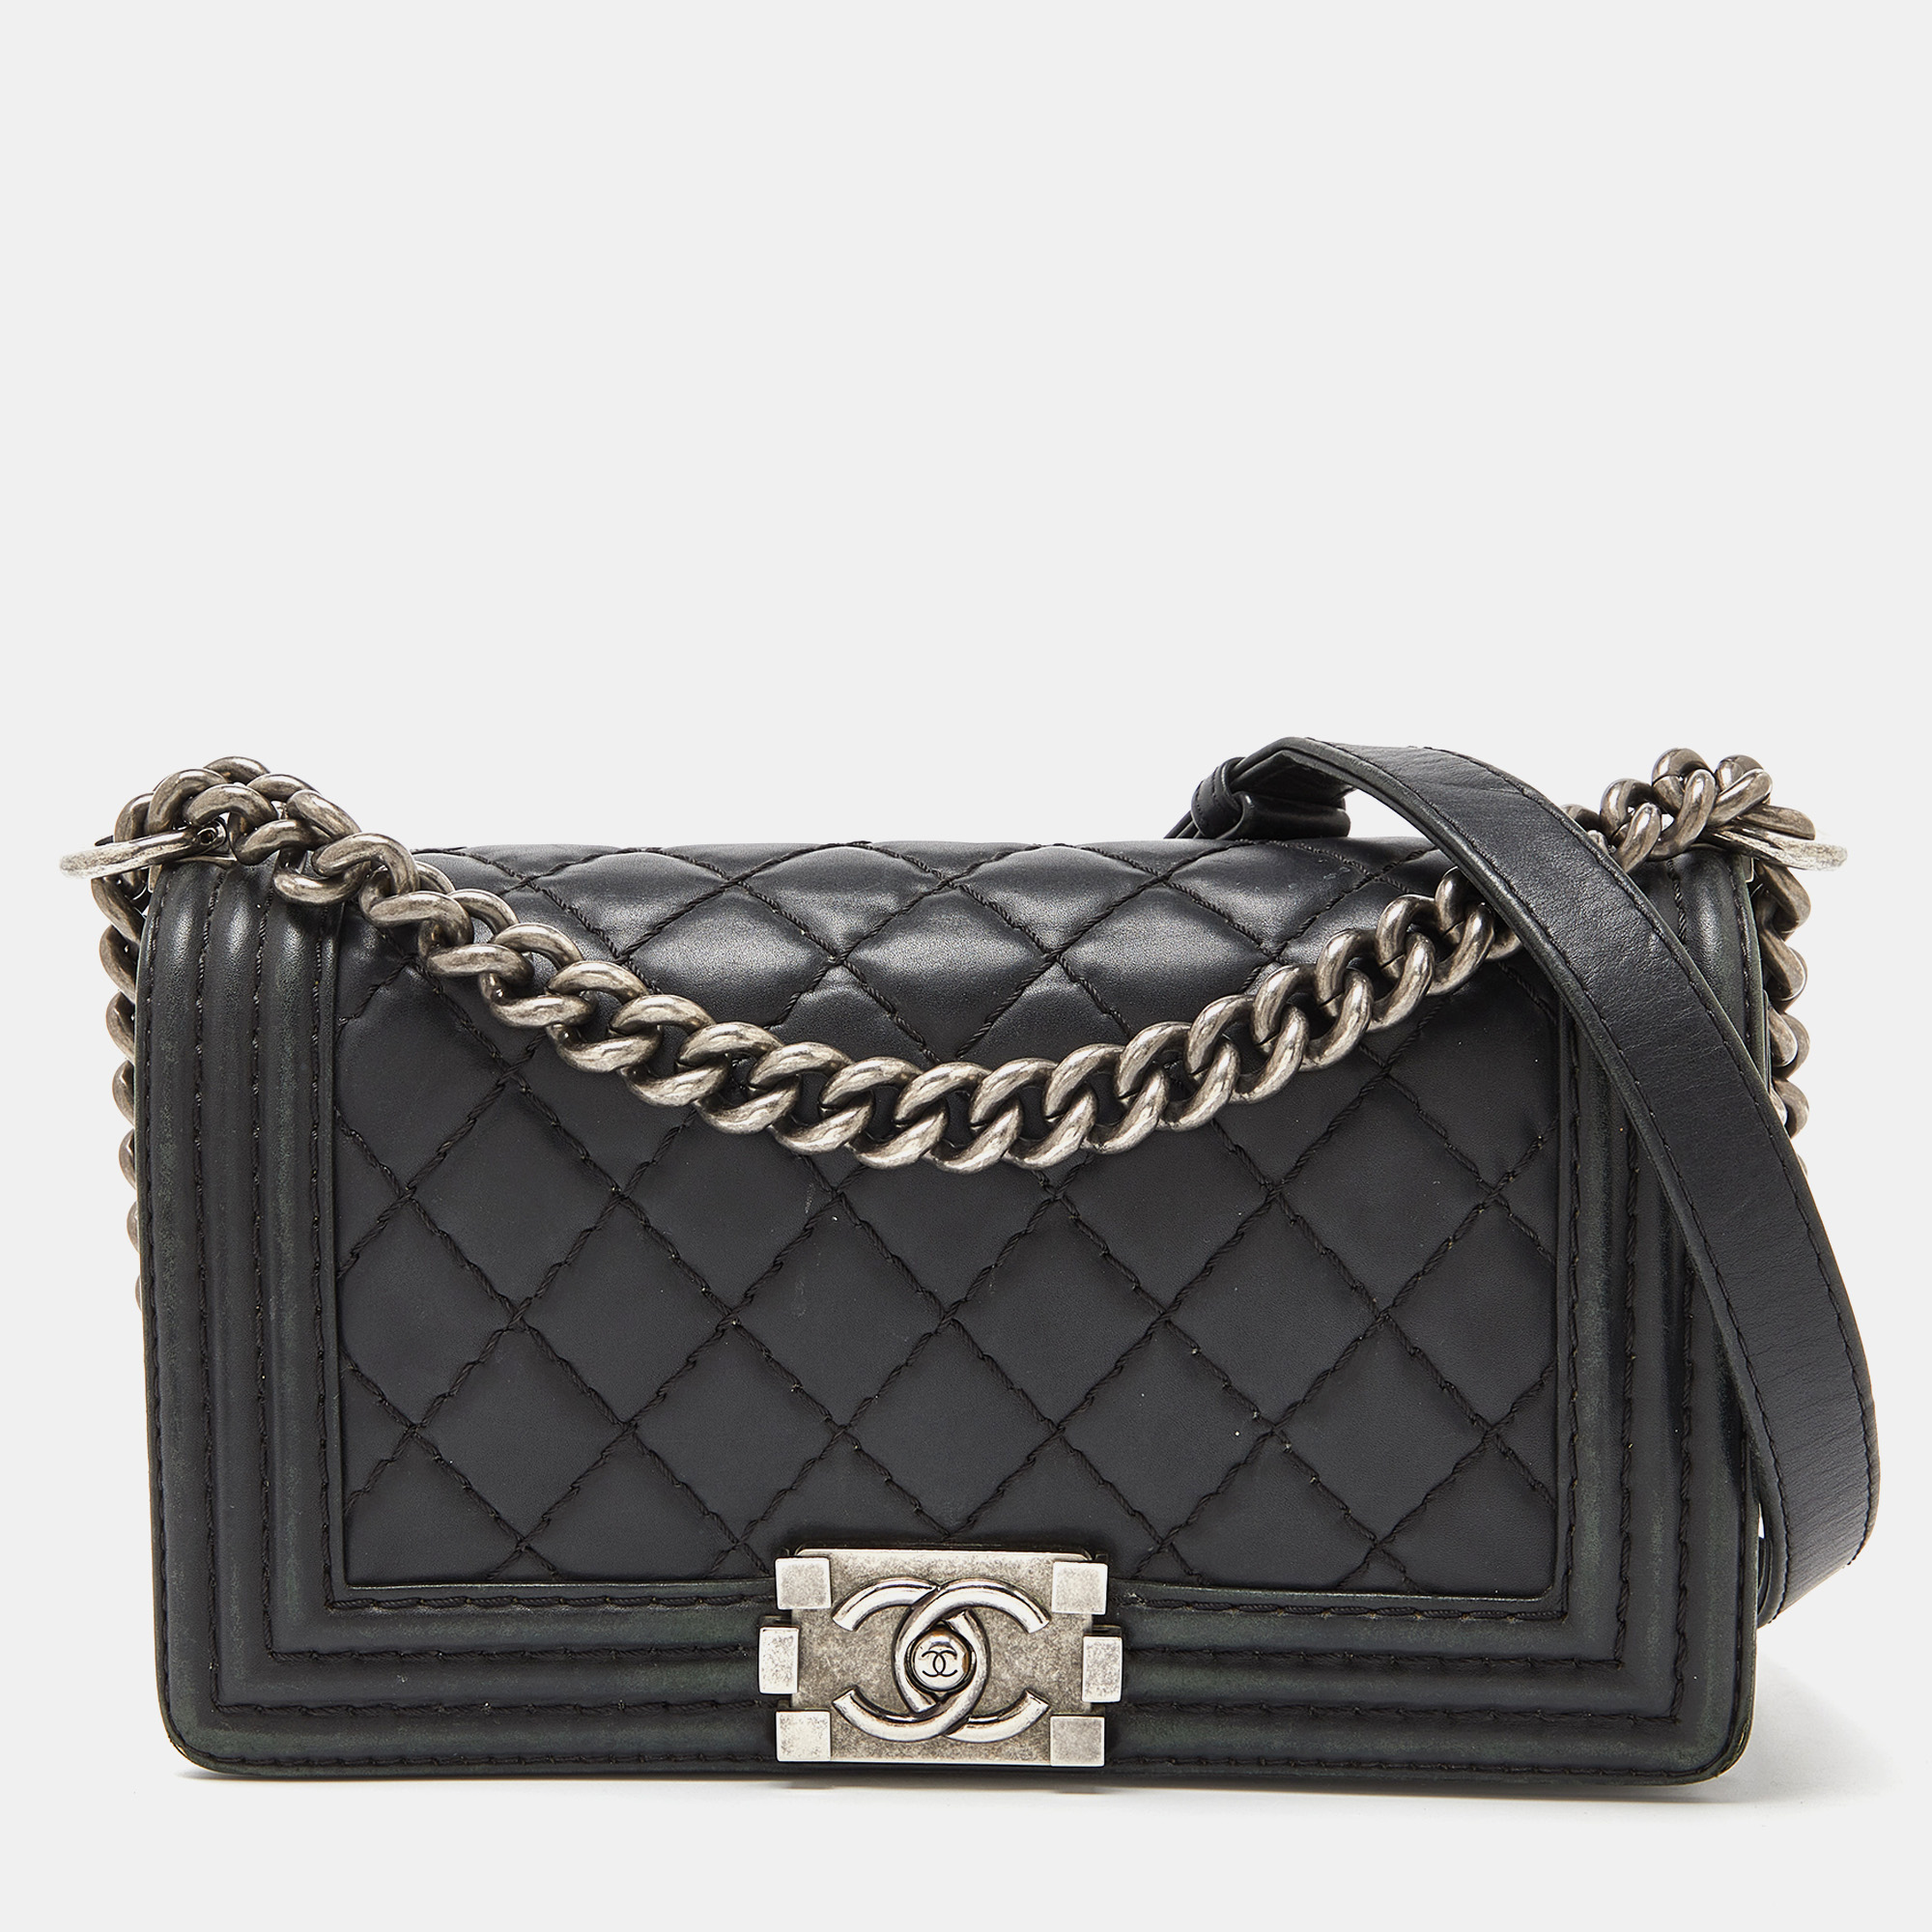 Chanel Black Quilted Wild Stitched Leather Medium Boy Bag